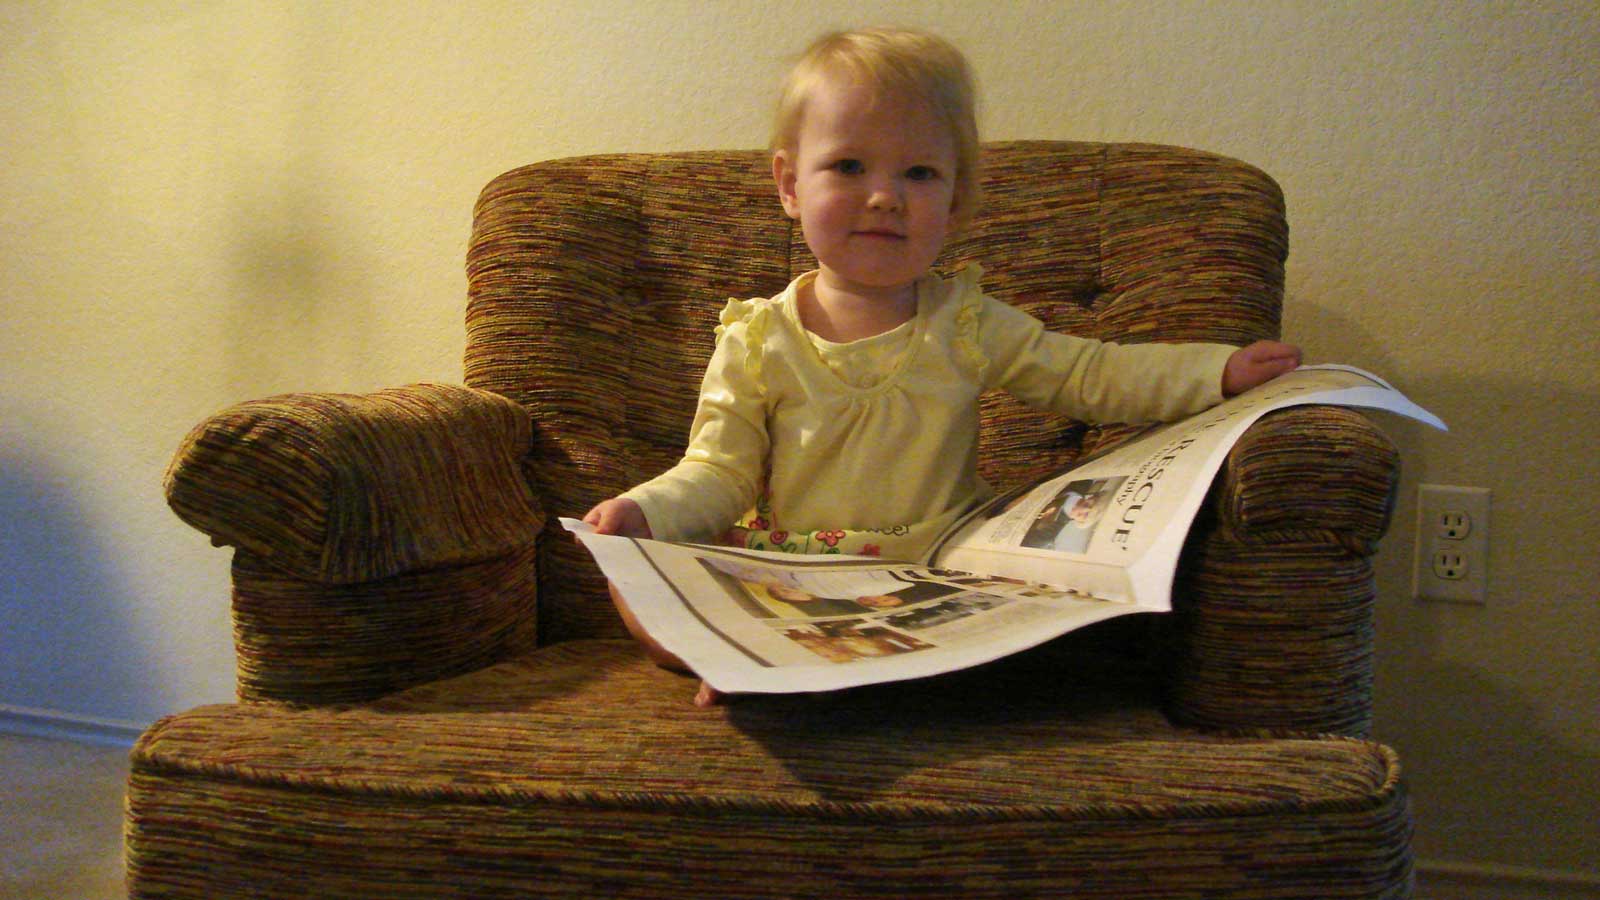 Emily sitting in a chair reading a newspaper